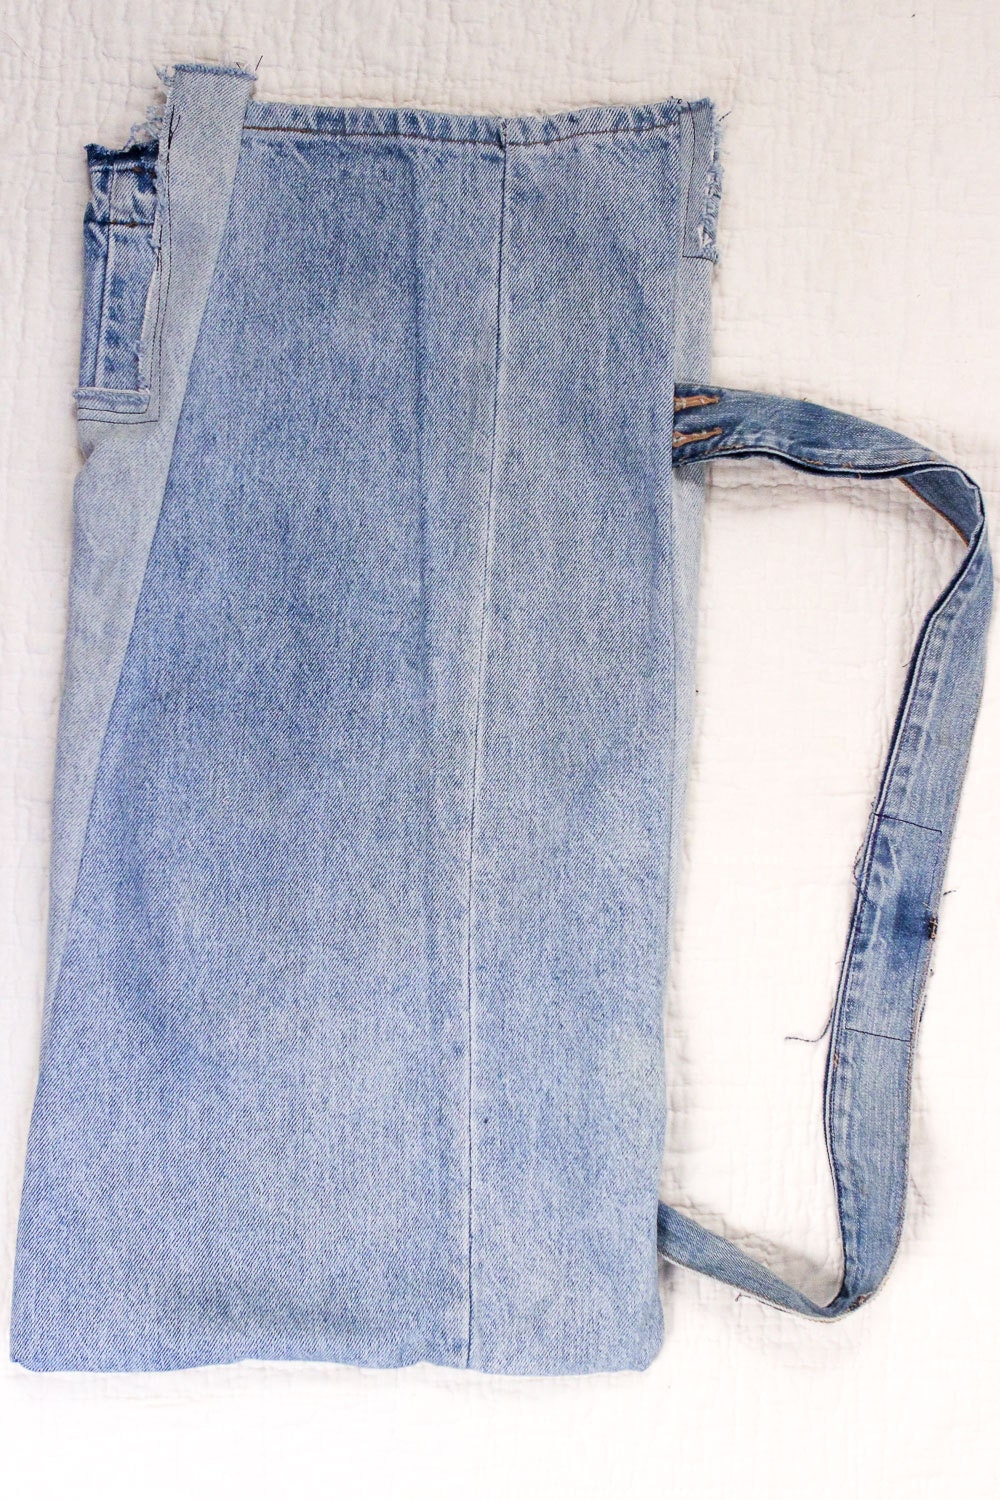 Yoga Bag Made From Recycled Vintage Jeans - Etsy